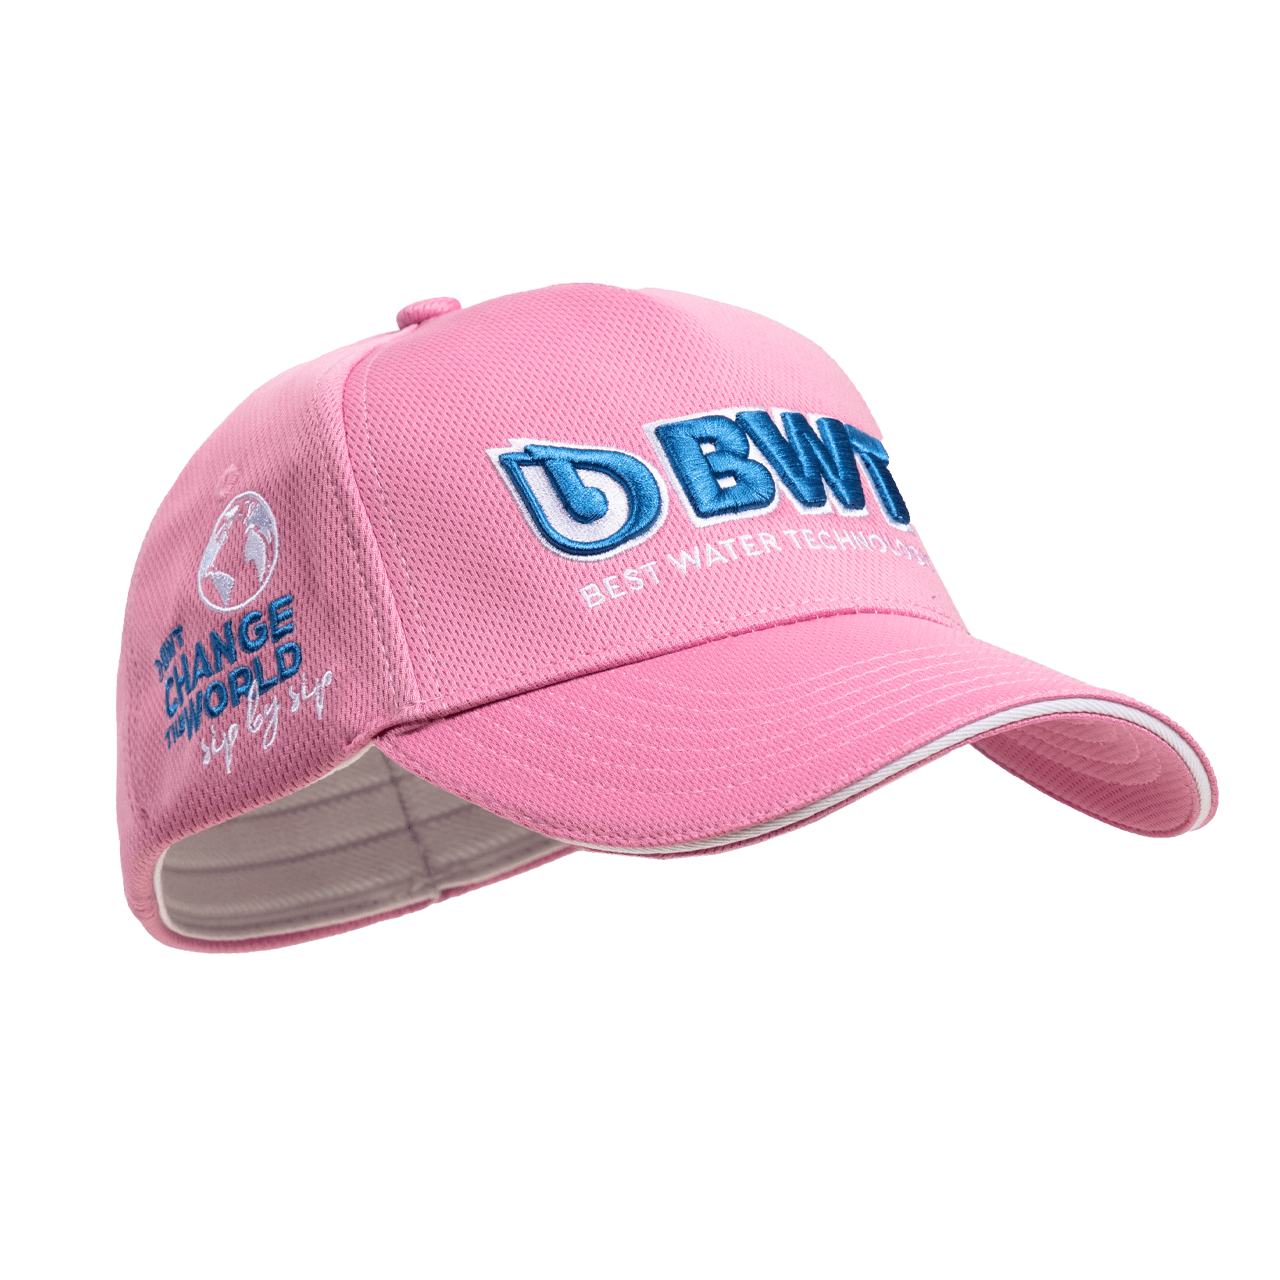 BWT Change the World cap in pink with blue BWT logo